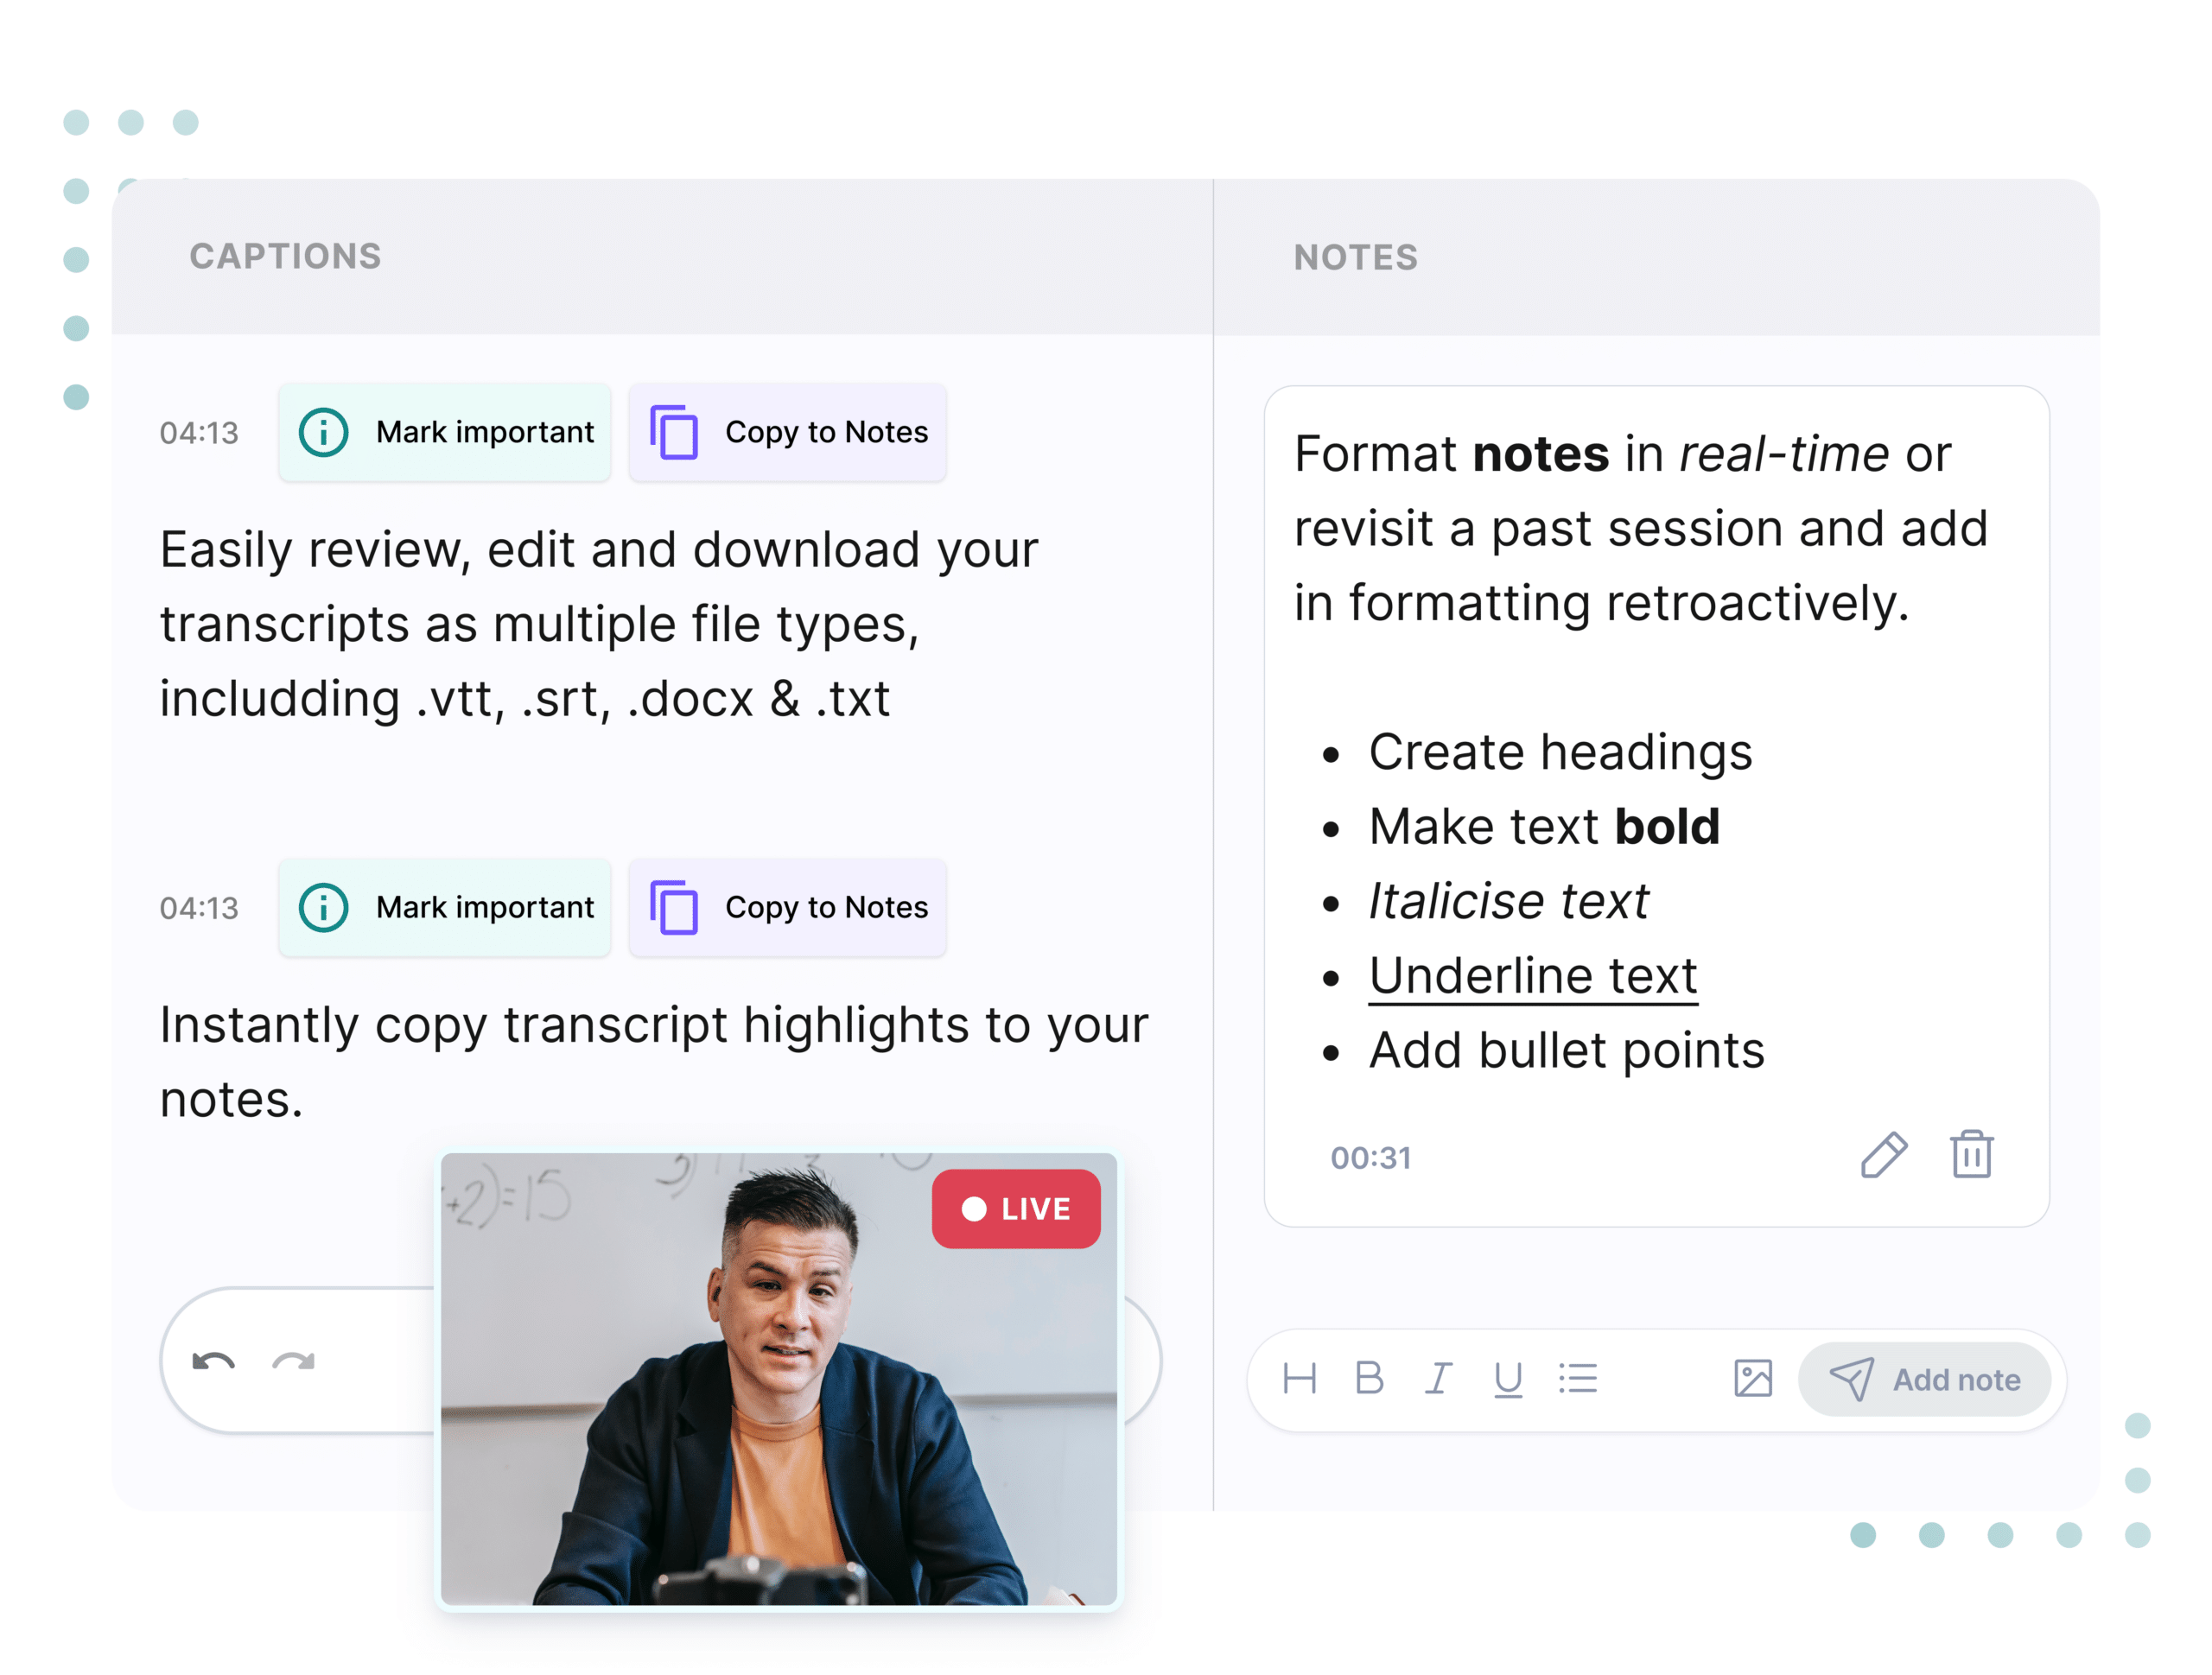 The Caption.Ed user interface with the captions: Easily review, edit and download your transcripts as multiple file types, including .vtt, .srt, .docx & .txt. Instantly copy transcript highlights to your notes.